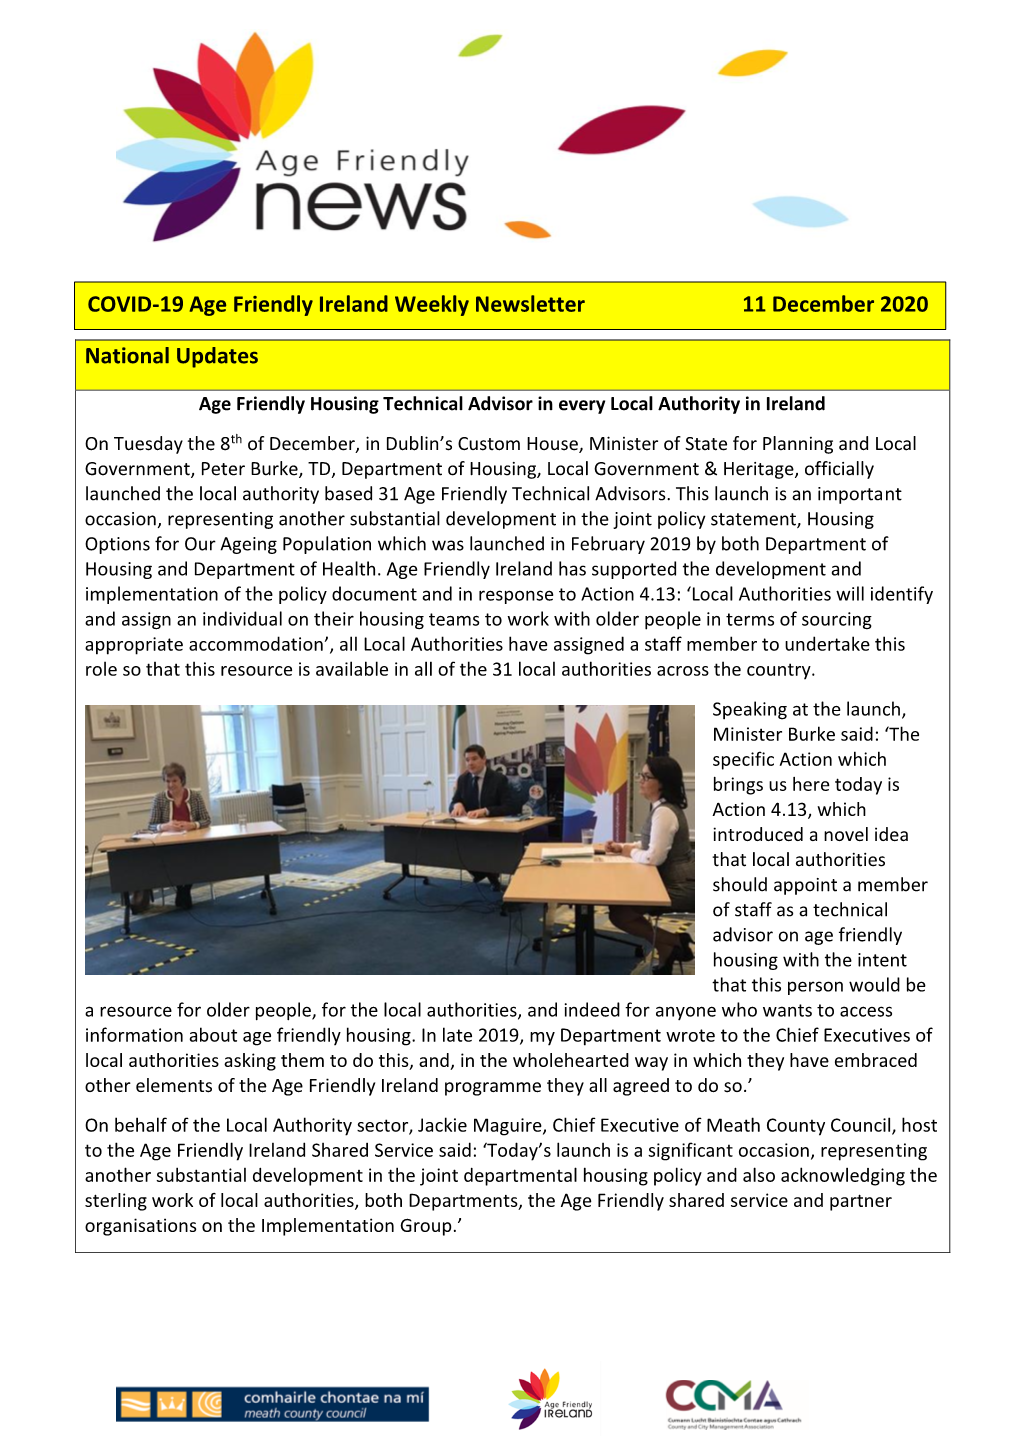 National Updates COVID-19 Age Friendly Ireland Weekly Newsletter